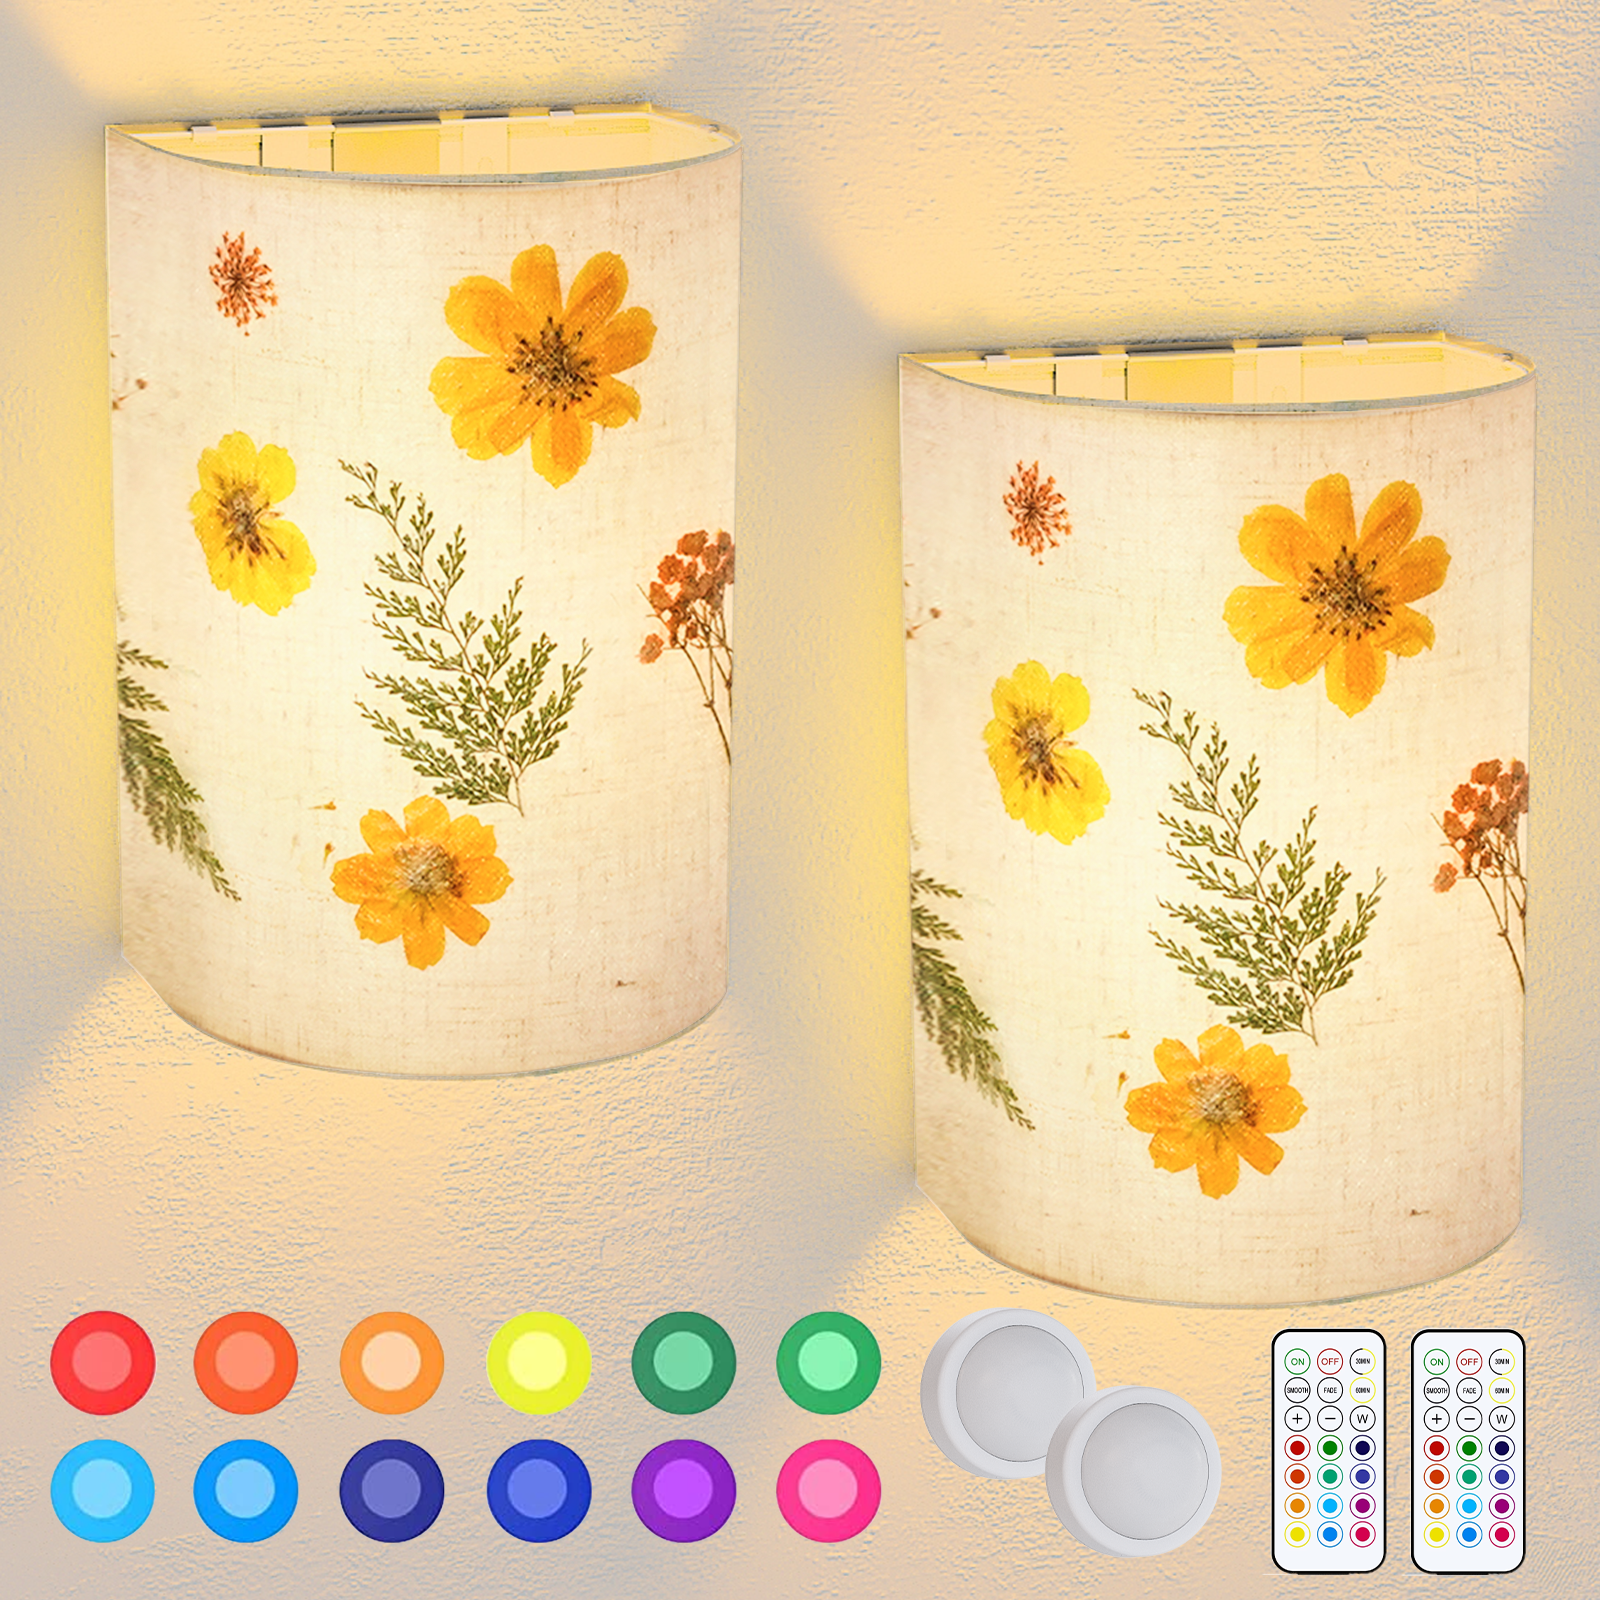 Battery Operated Wall Sconces Set of Two, Rechargeable Magnetic Wireless Sconces Linen Fabric Wall Lighting,